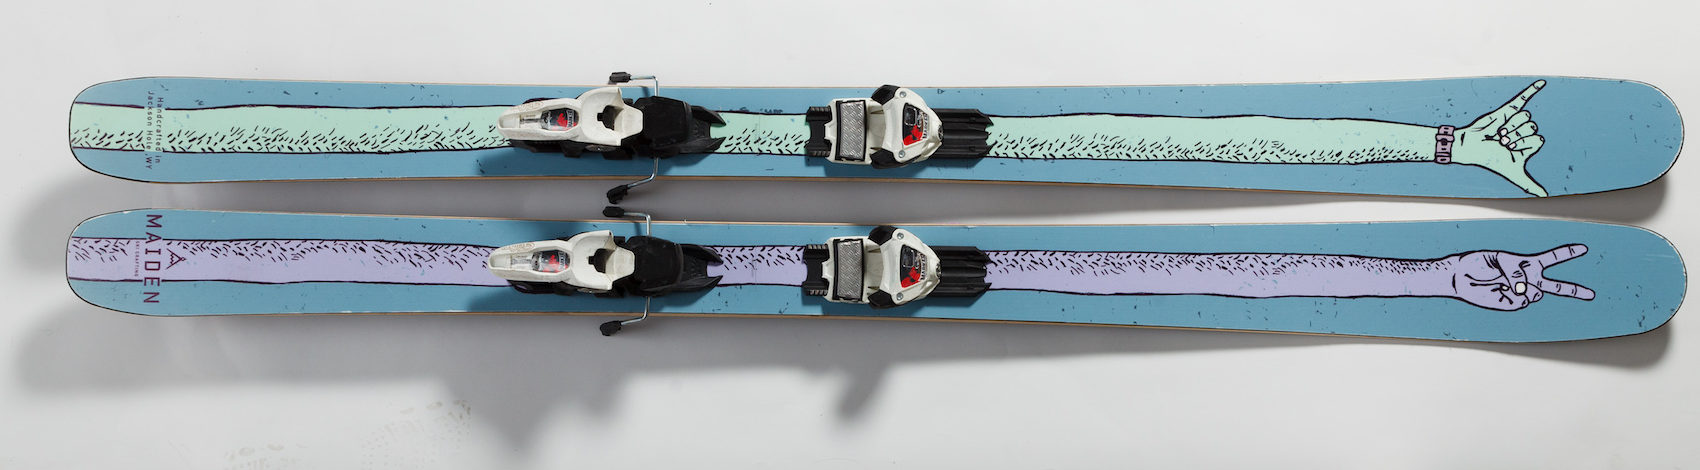 Maiden Skis - Peace and Rock Custom